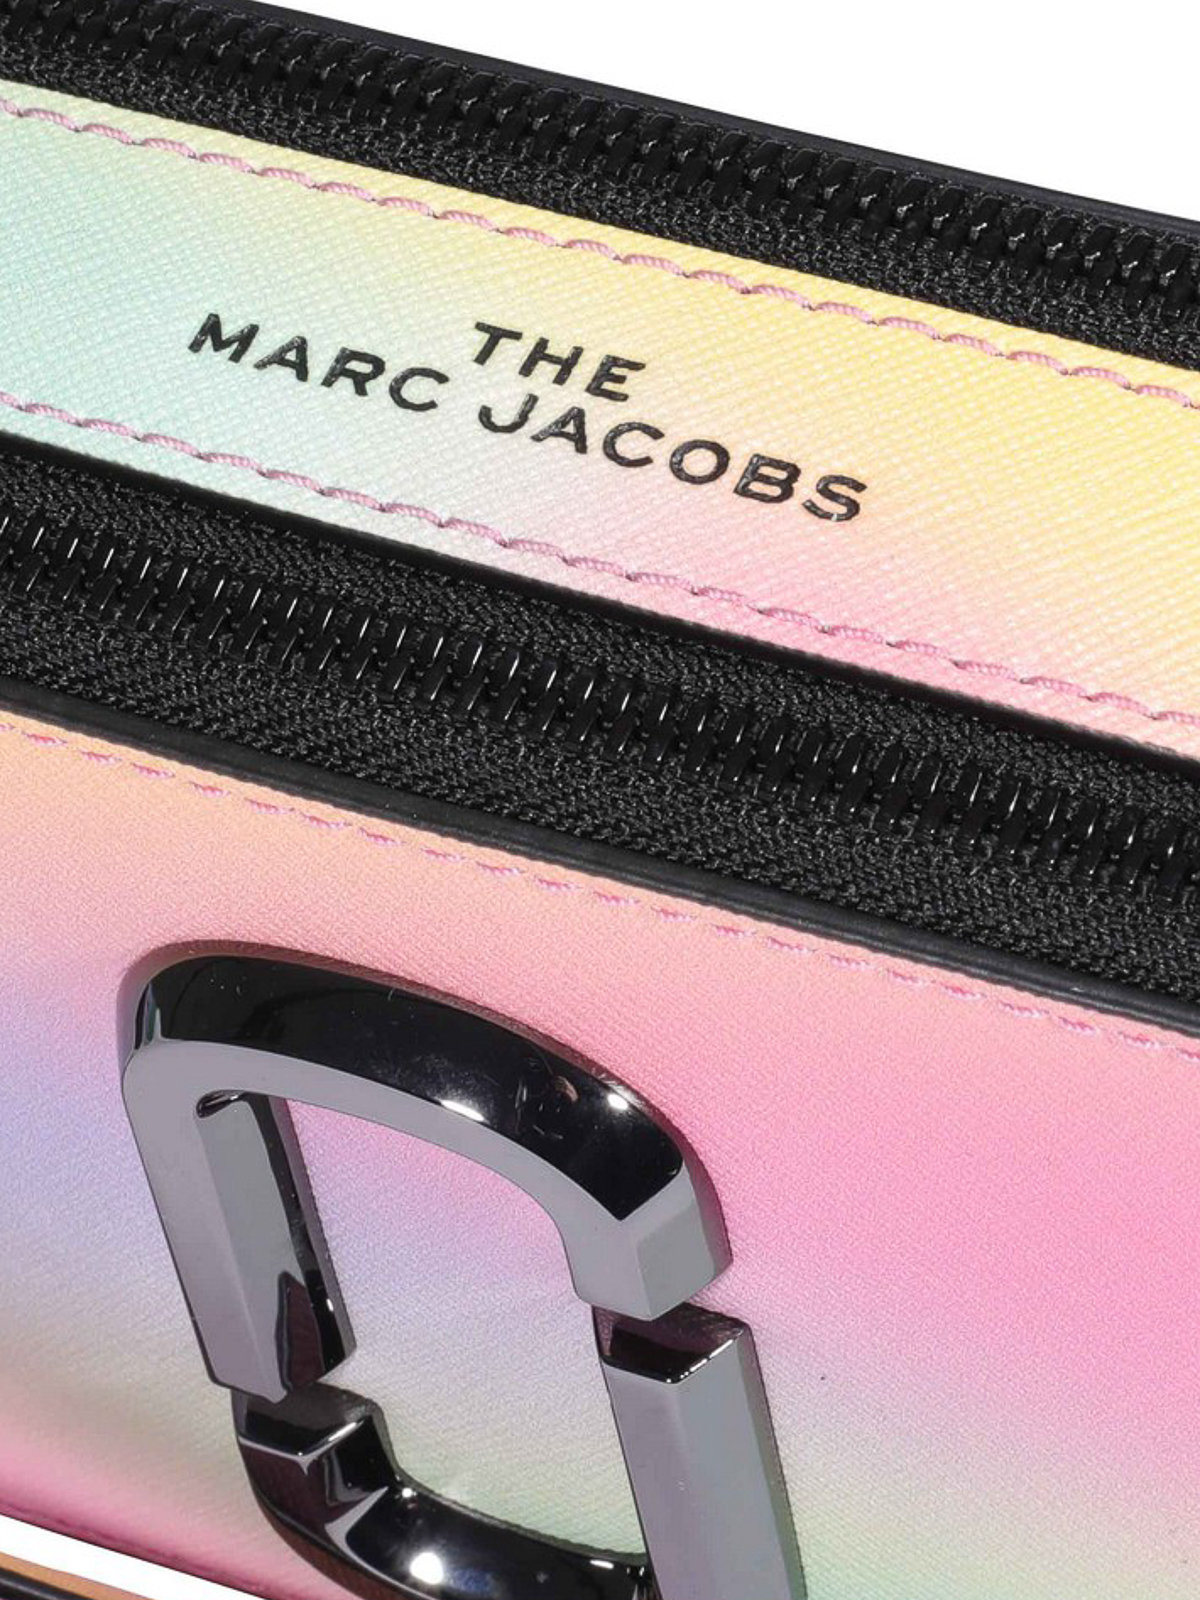 Cross body bags Marc Jacobs - The Snapshot Airbrush leather bag -  M0015789100